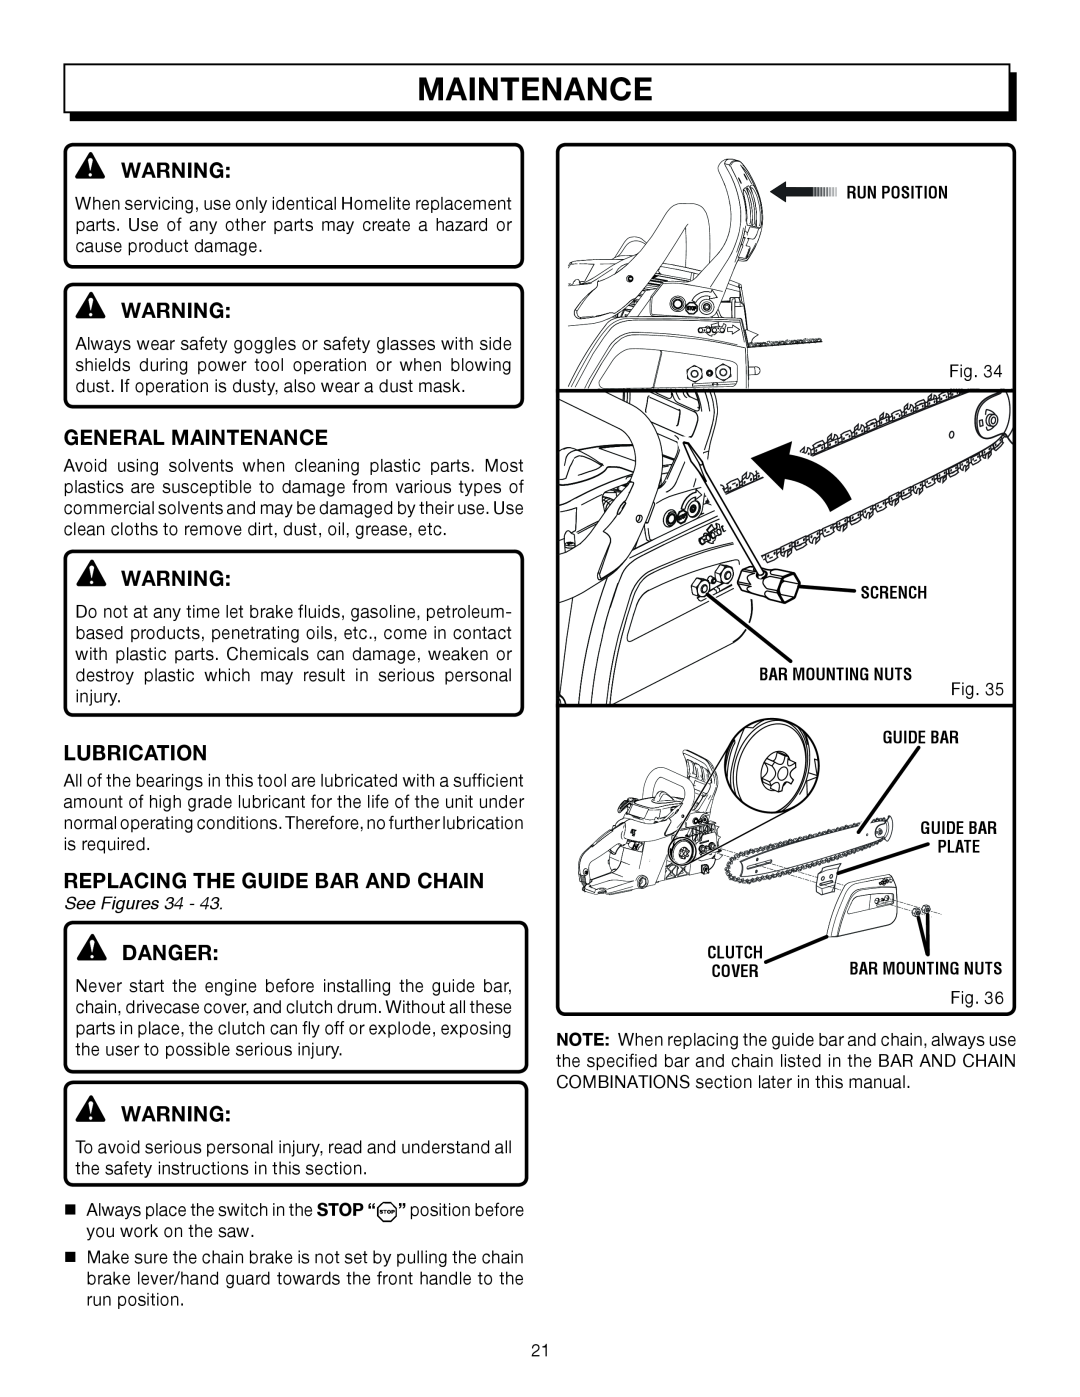 Homelite UT10032, UT10512 General Maintenance, Lubrication, Replacing The Guide Bar And Chain, Danger, See Figures 34 